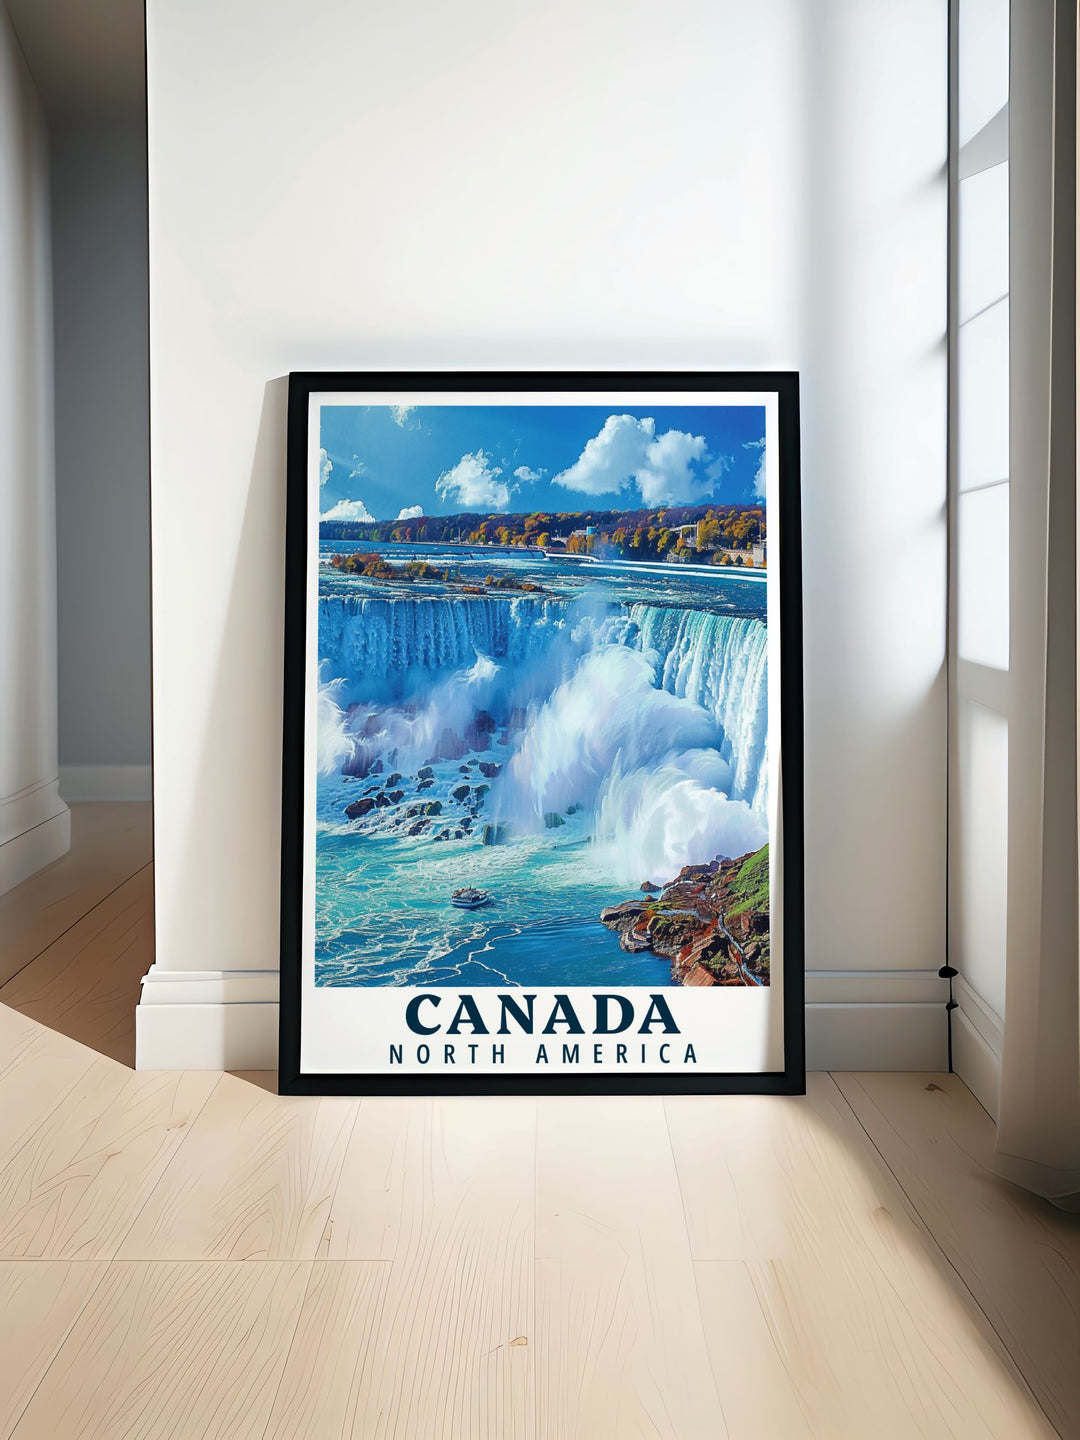 This travel poster captures the iconic Niagara Falls in Canada, perfect for adding a touch of natural splendor to your home decor.